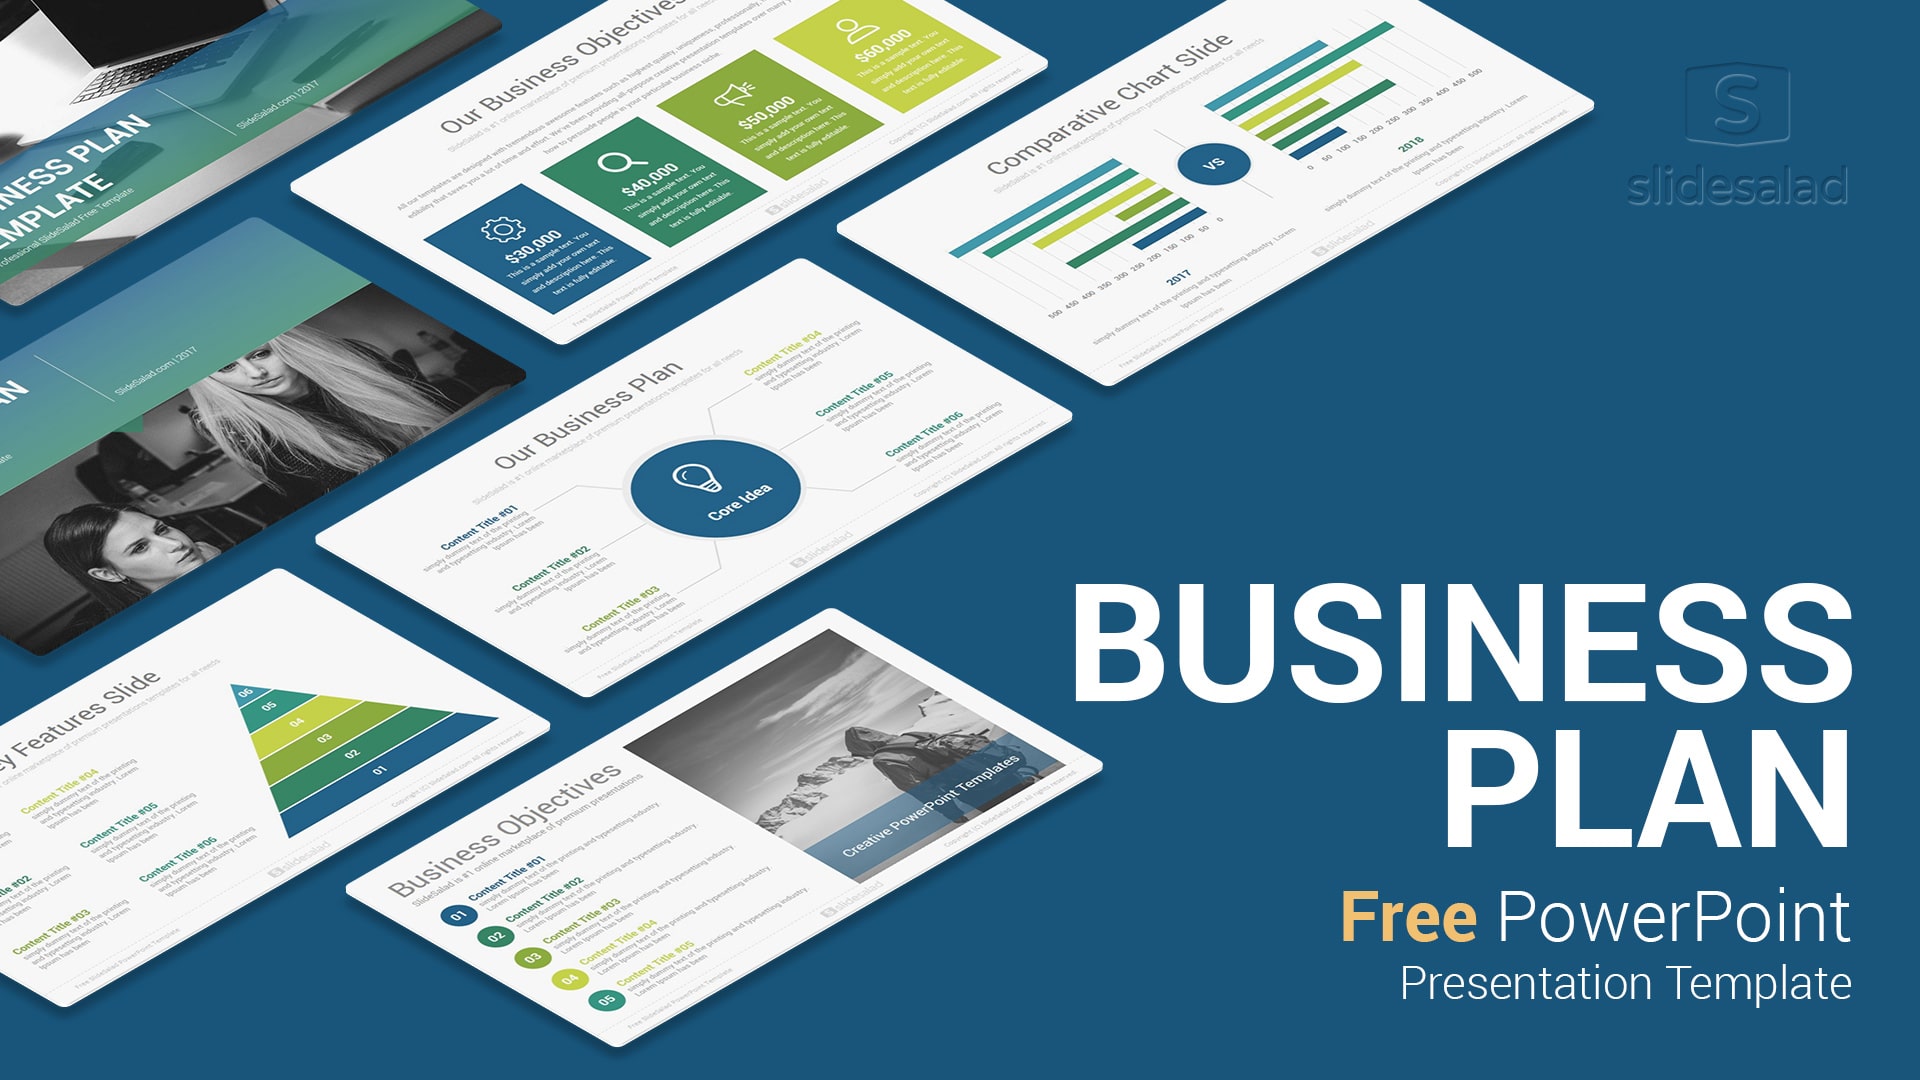 Business Plan Free PowerPoint Presentation Template - SlideSalad Intended For Business Idea Pitch Template